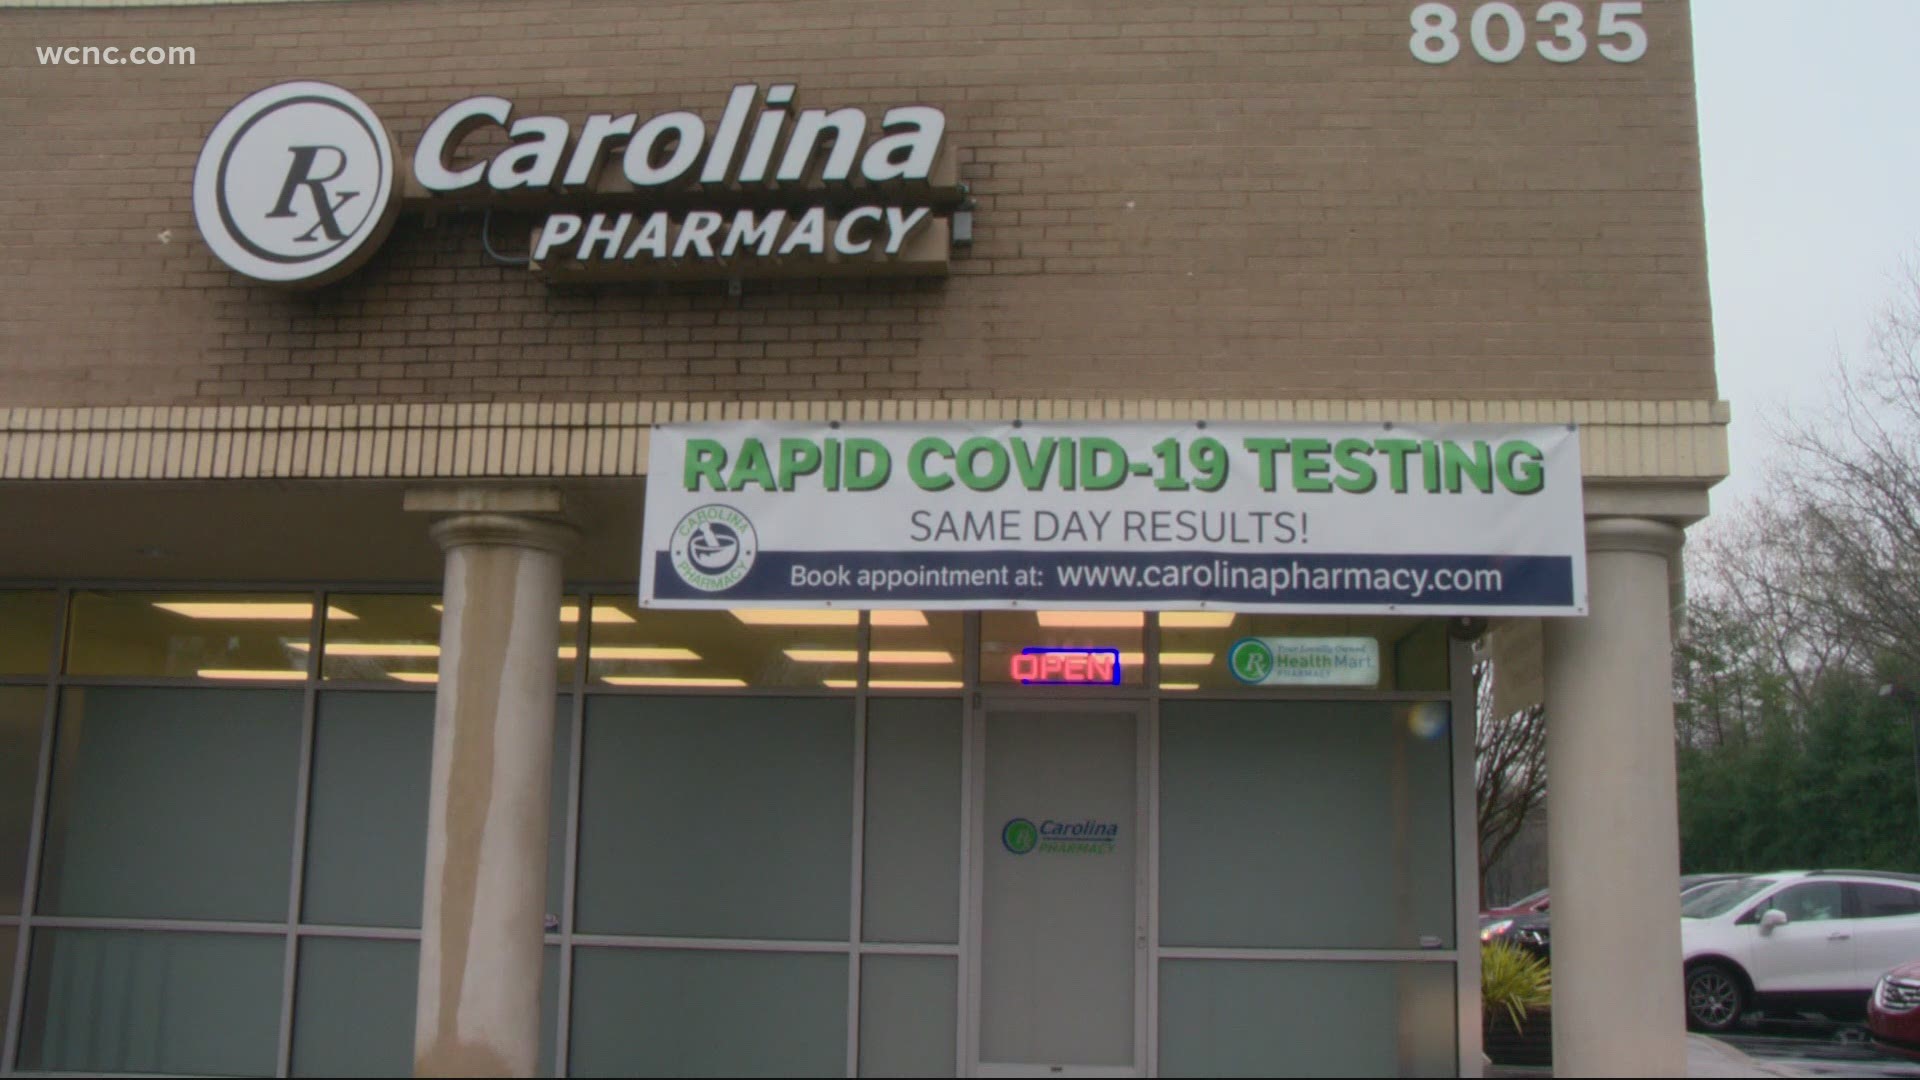 WCNC Features Carolina Pharmacy on COVID-19 Vaccines